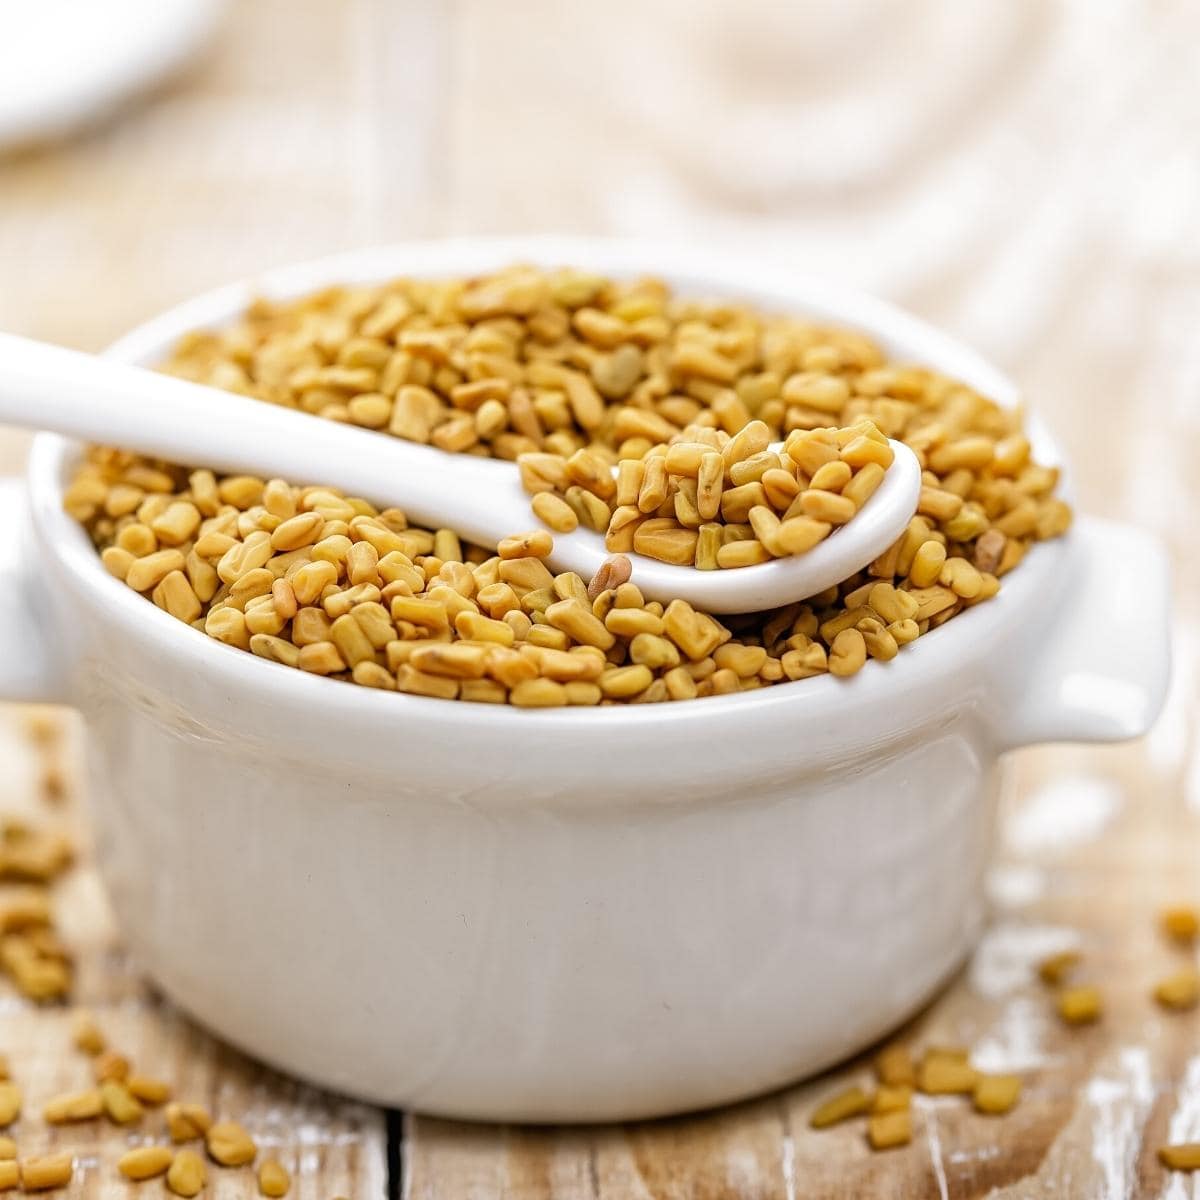 A white dish filled with fenugreek seeds.